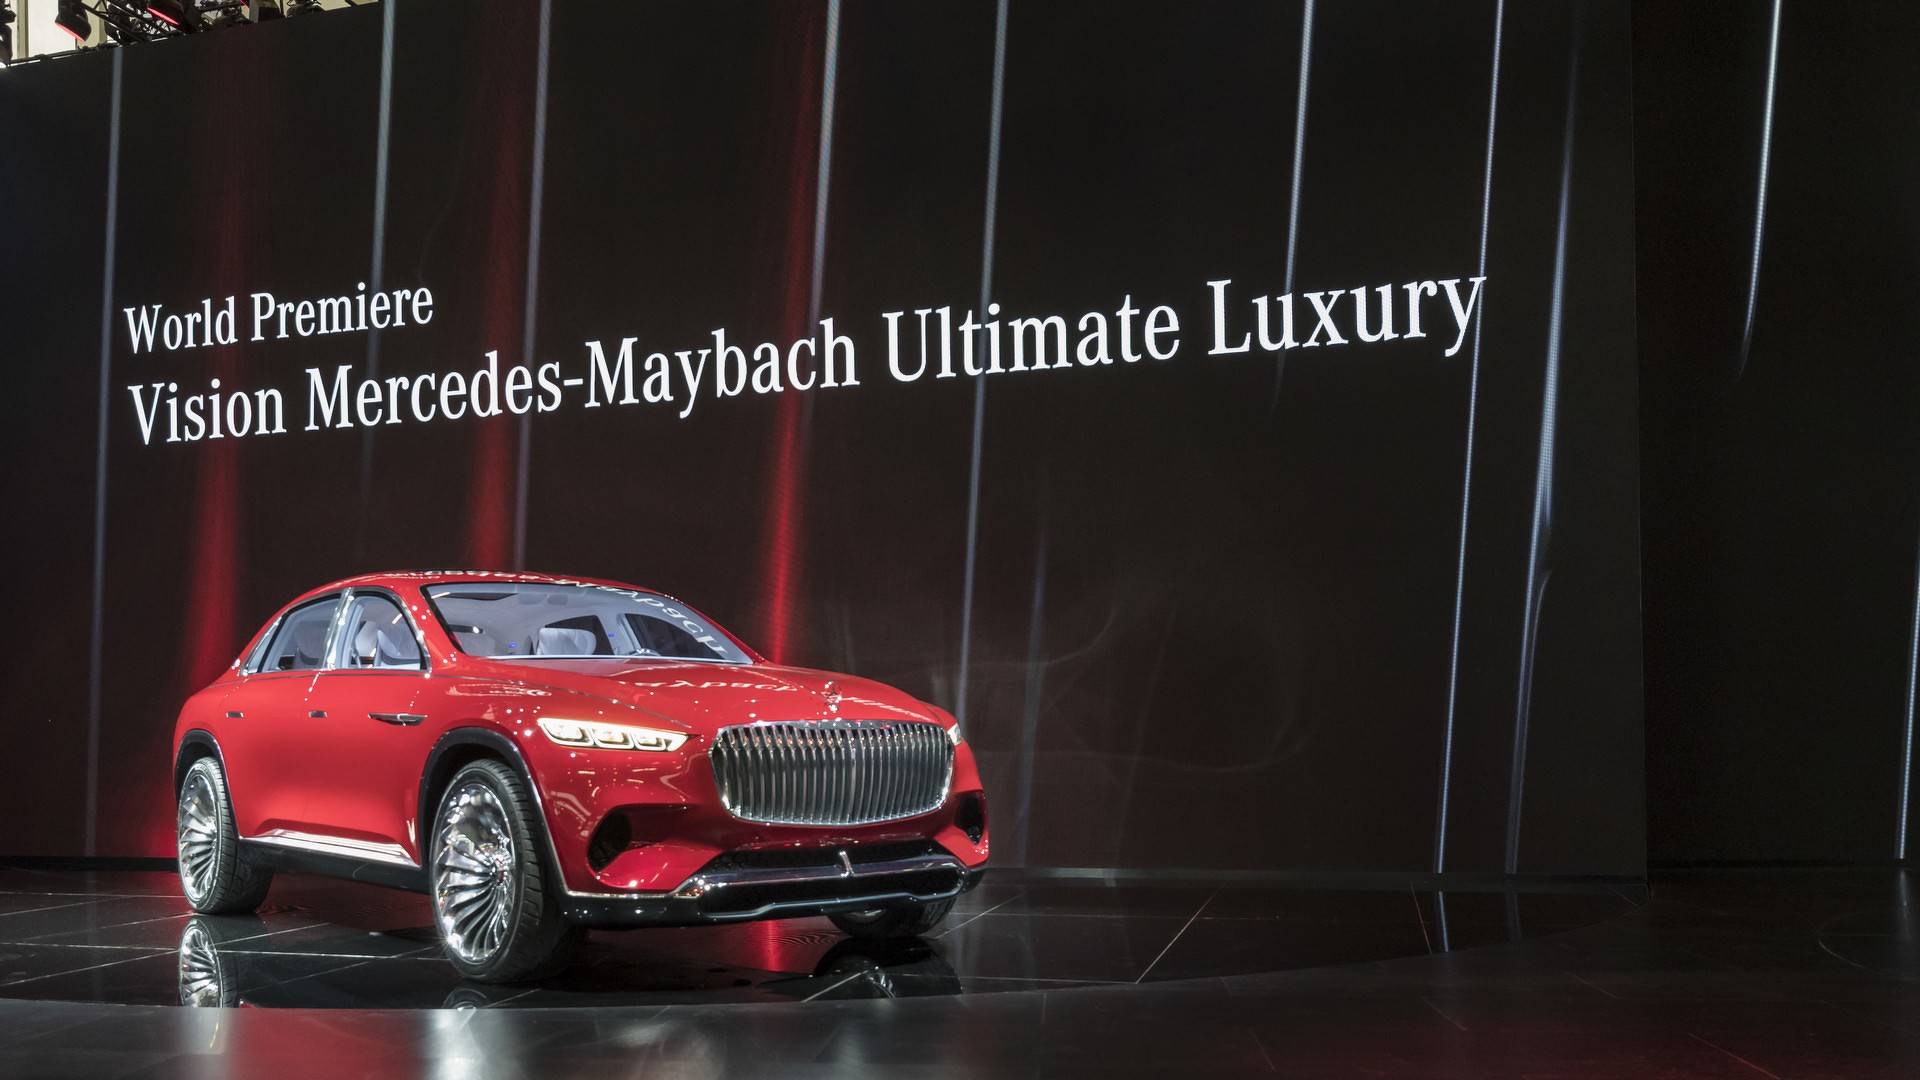 The Vision Mercedes Maybach Ultimate Luxury Limousine